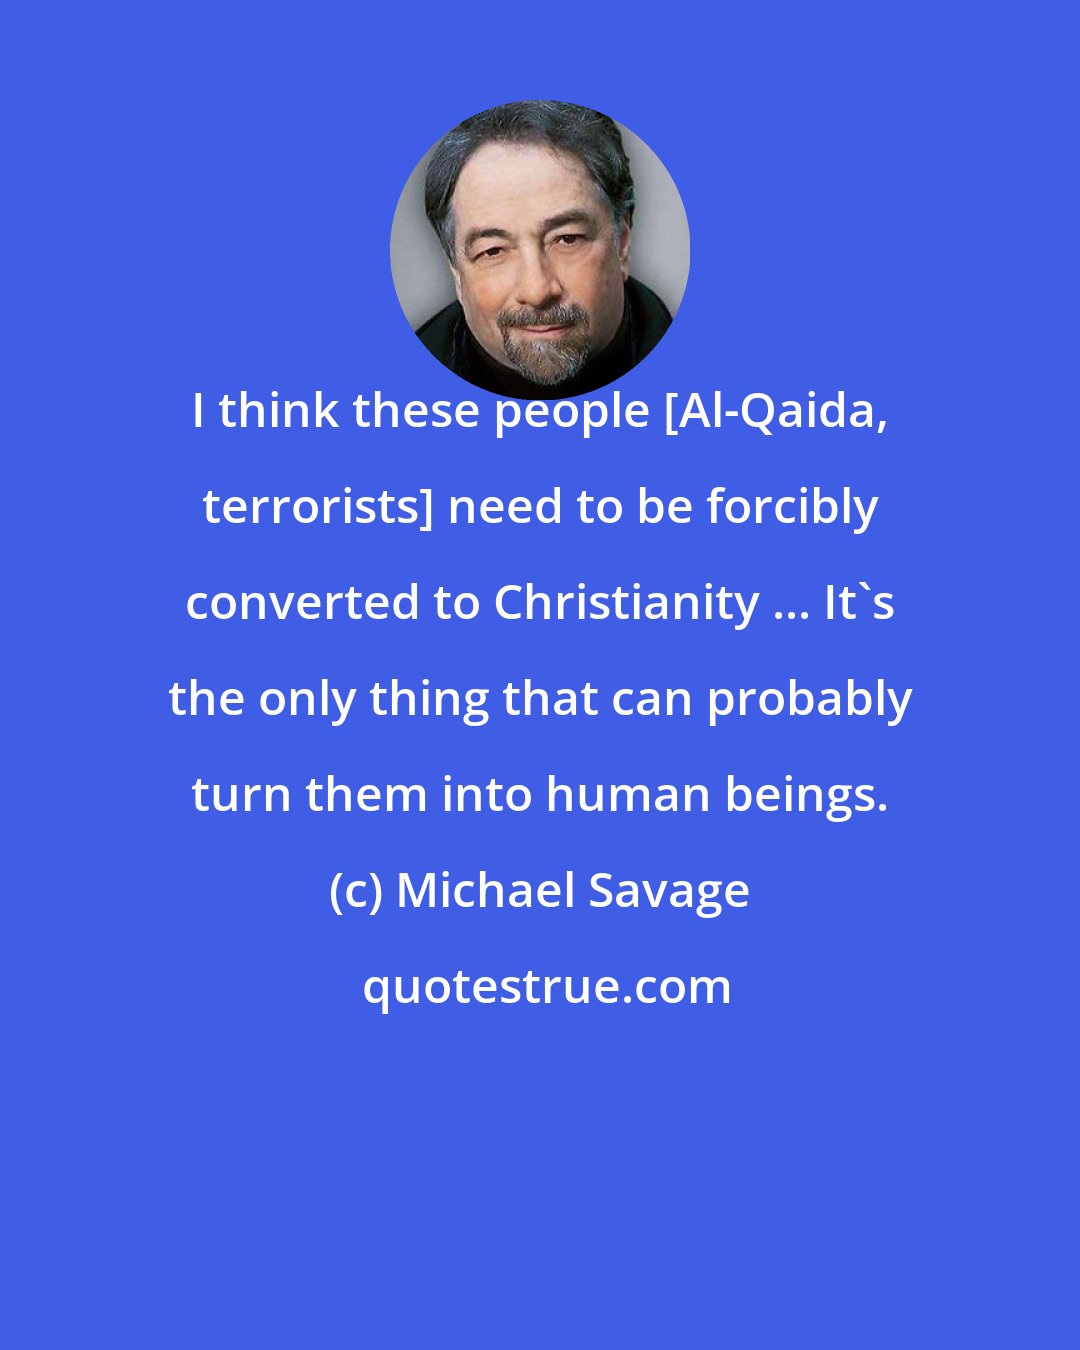 Michael Savage: I think these people [Al-Qaida, terrorists] need to be forcibly converted to Christianity ... It's the only thing that can probably turn them into human beings.